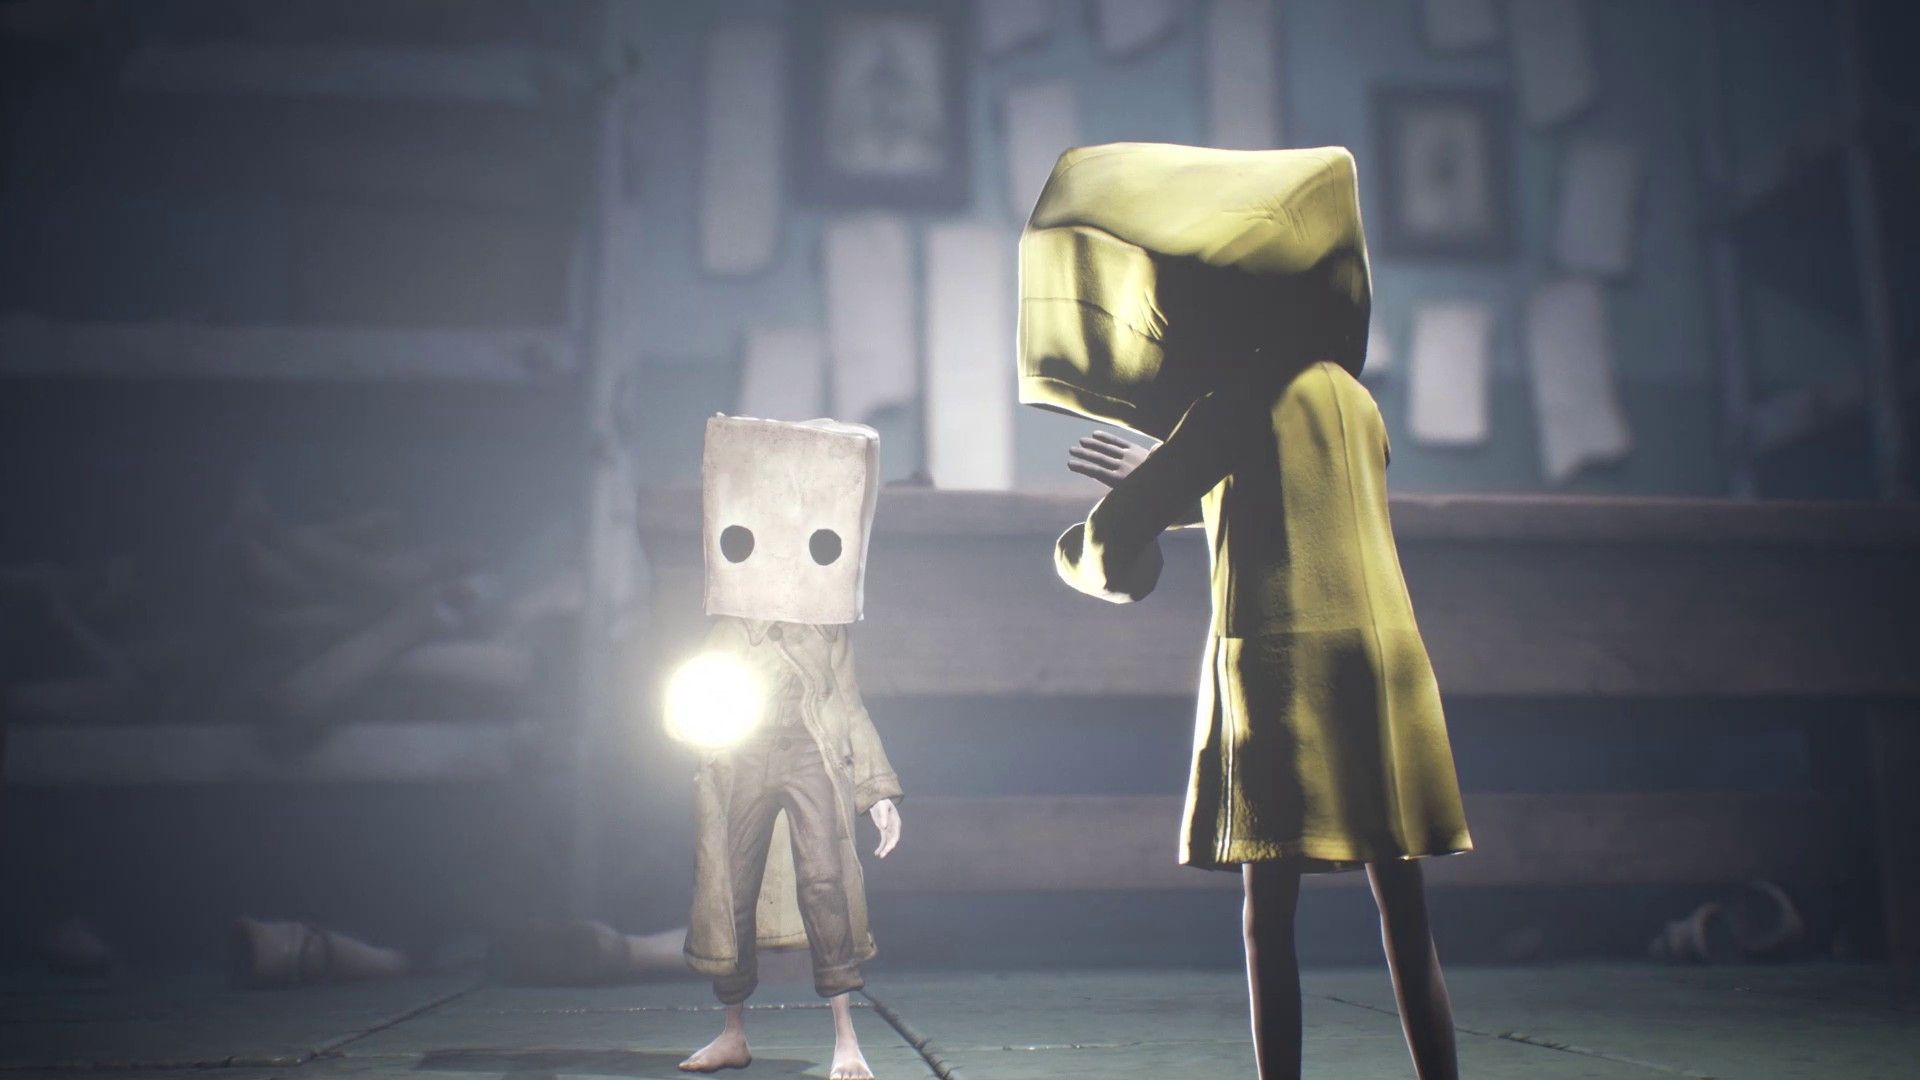 Wake Up, Mono: It's Time to Play the Little Nightmares II Demo